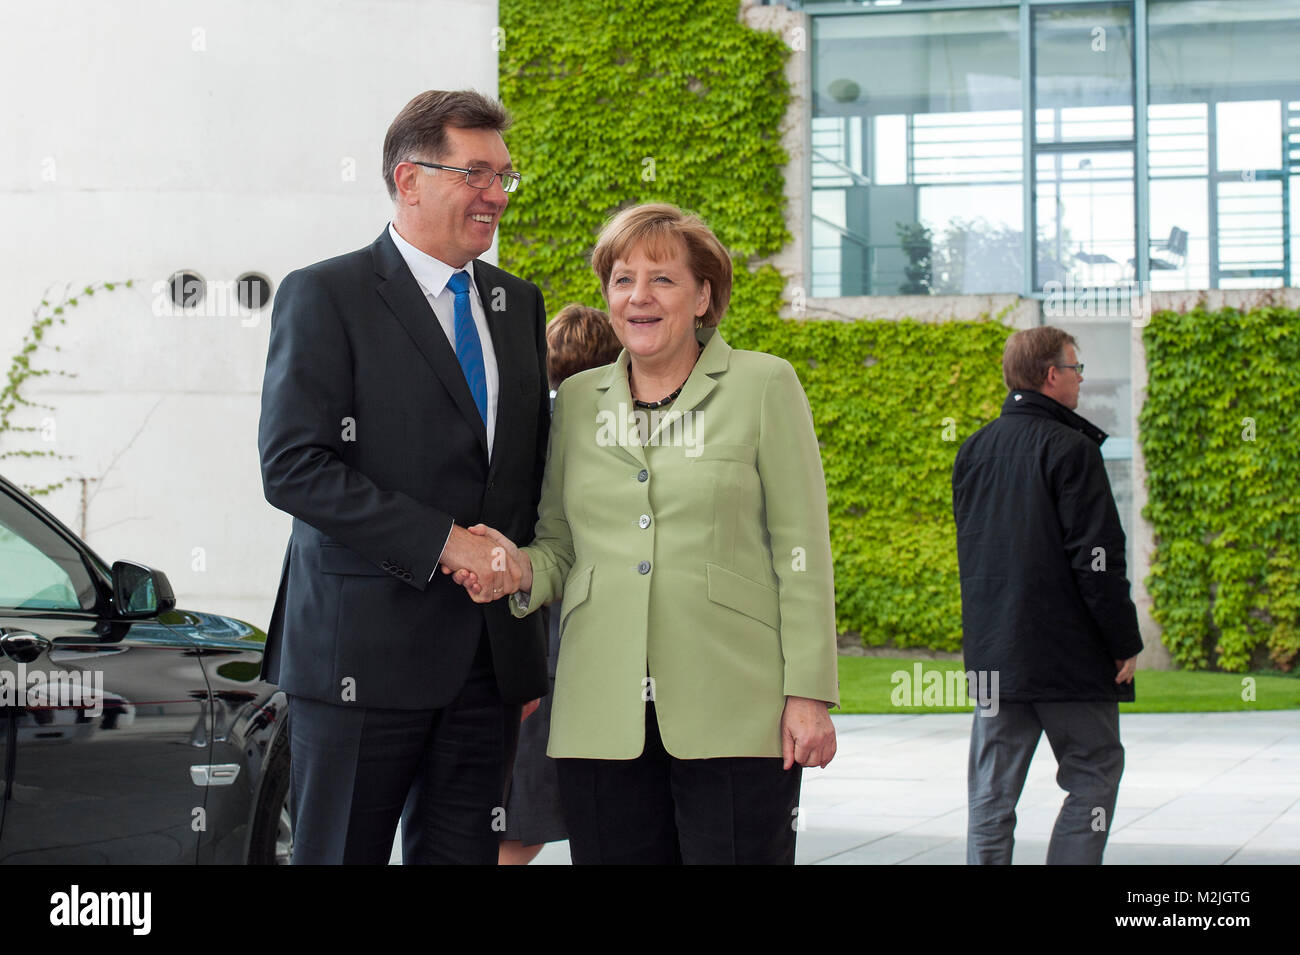 German Chancellor Angela Merkel receives Prime Minister of the Republic of Lithuania, Algirdas Butkevicius, with military honors in the Federal Chancellery. Stock Photo